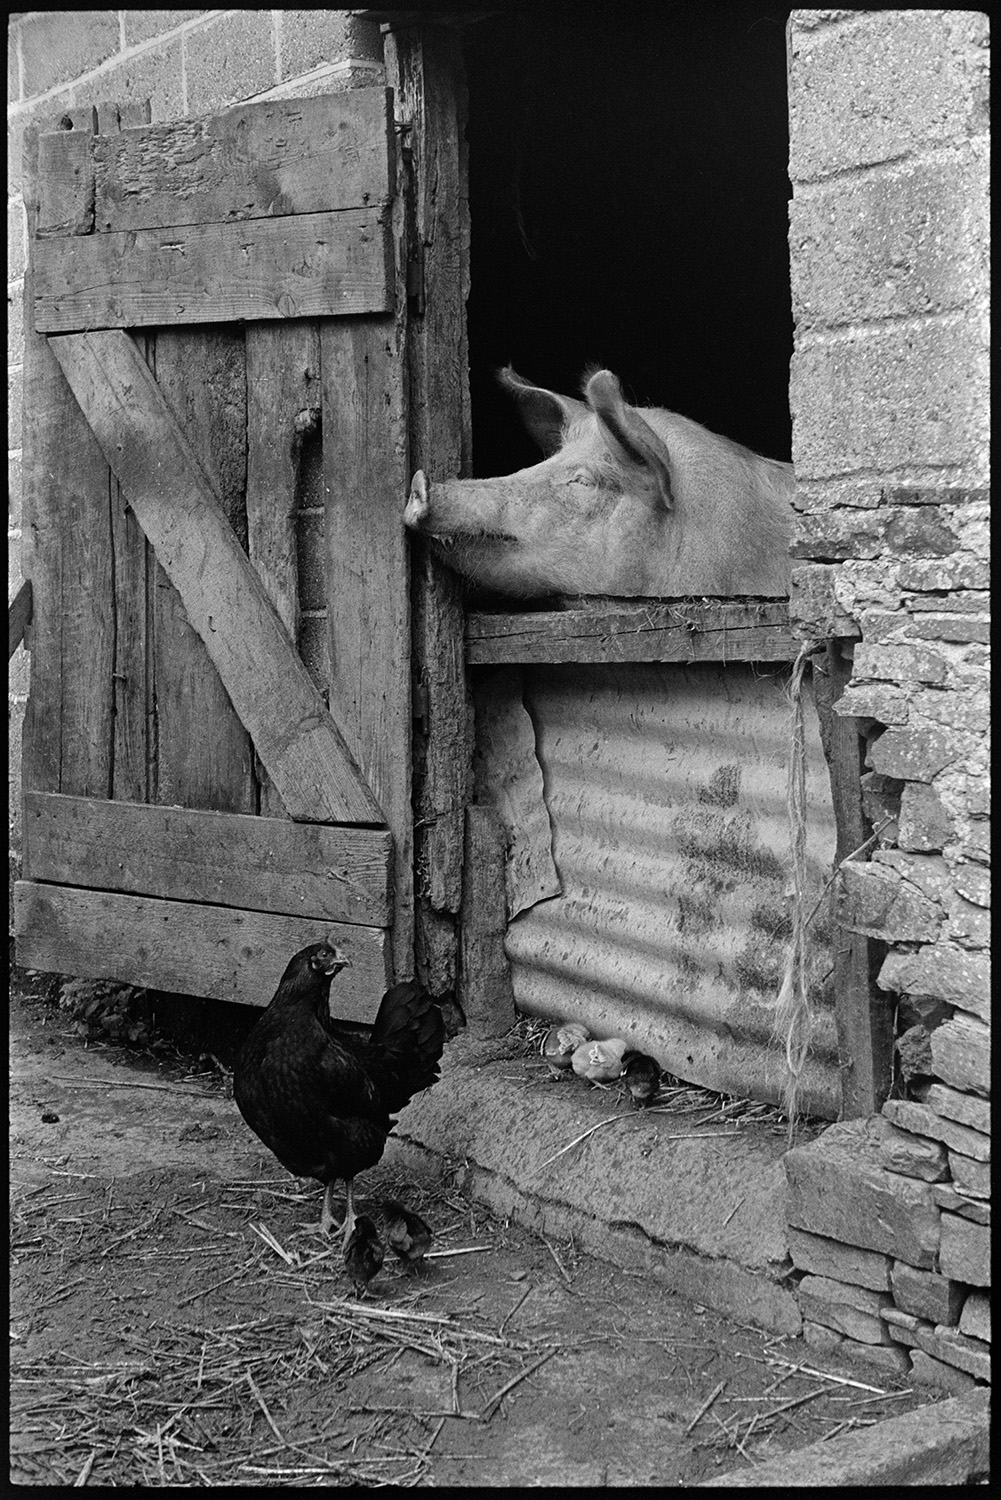 Pig looking out of pigsty in barn. 
[A pig looking over a makeshift corrugated iron stable door to a barn at Ashwell, Dolton. A chicken and her chicks are outside the barn by the wooden barn door.]